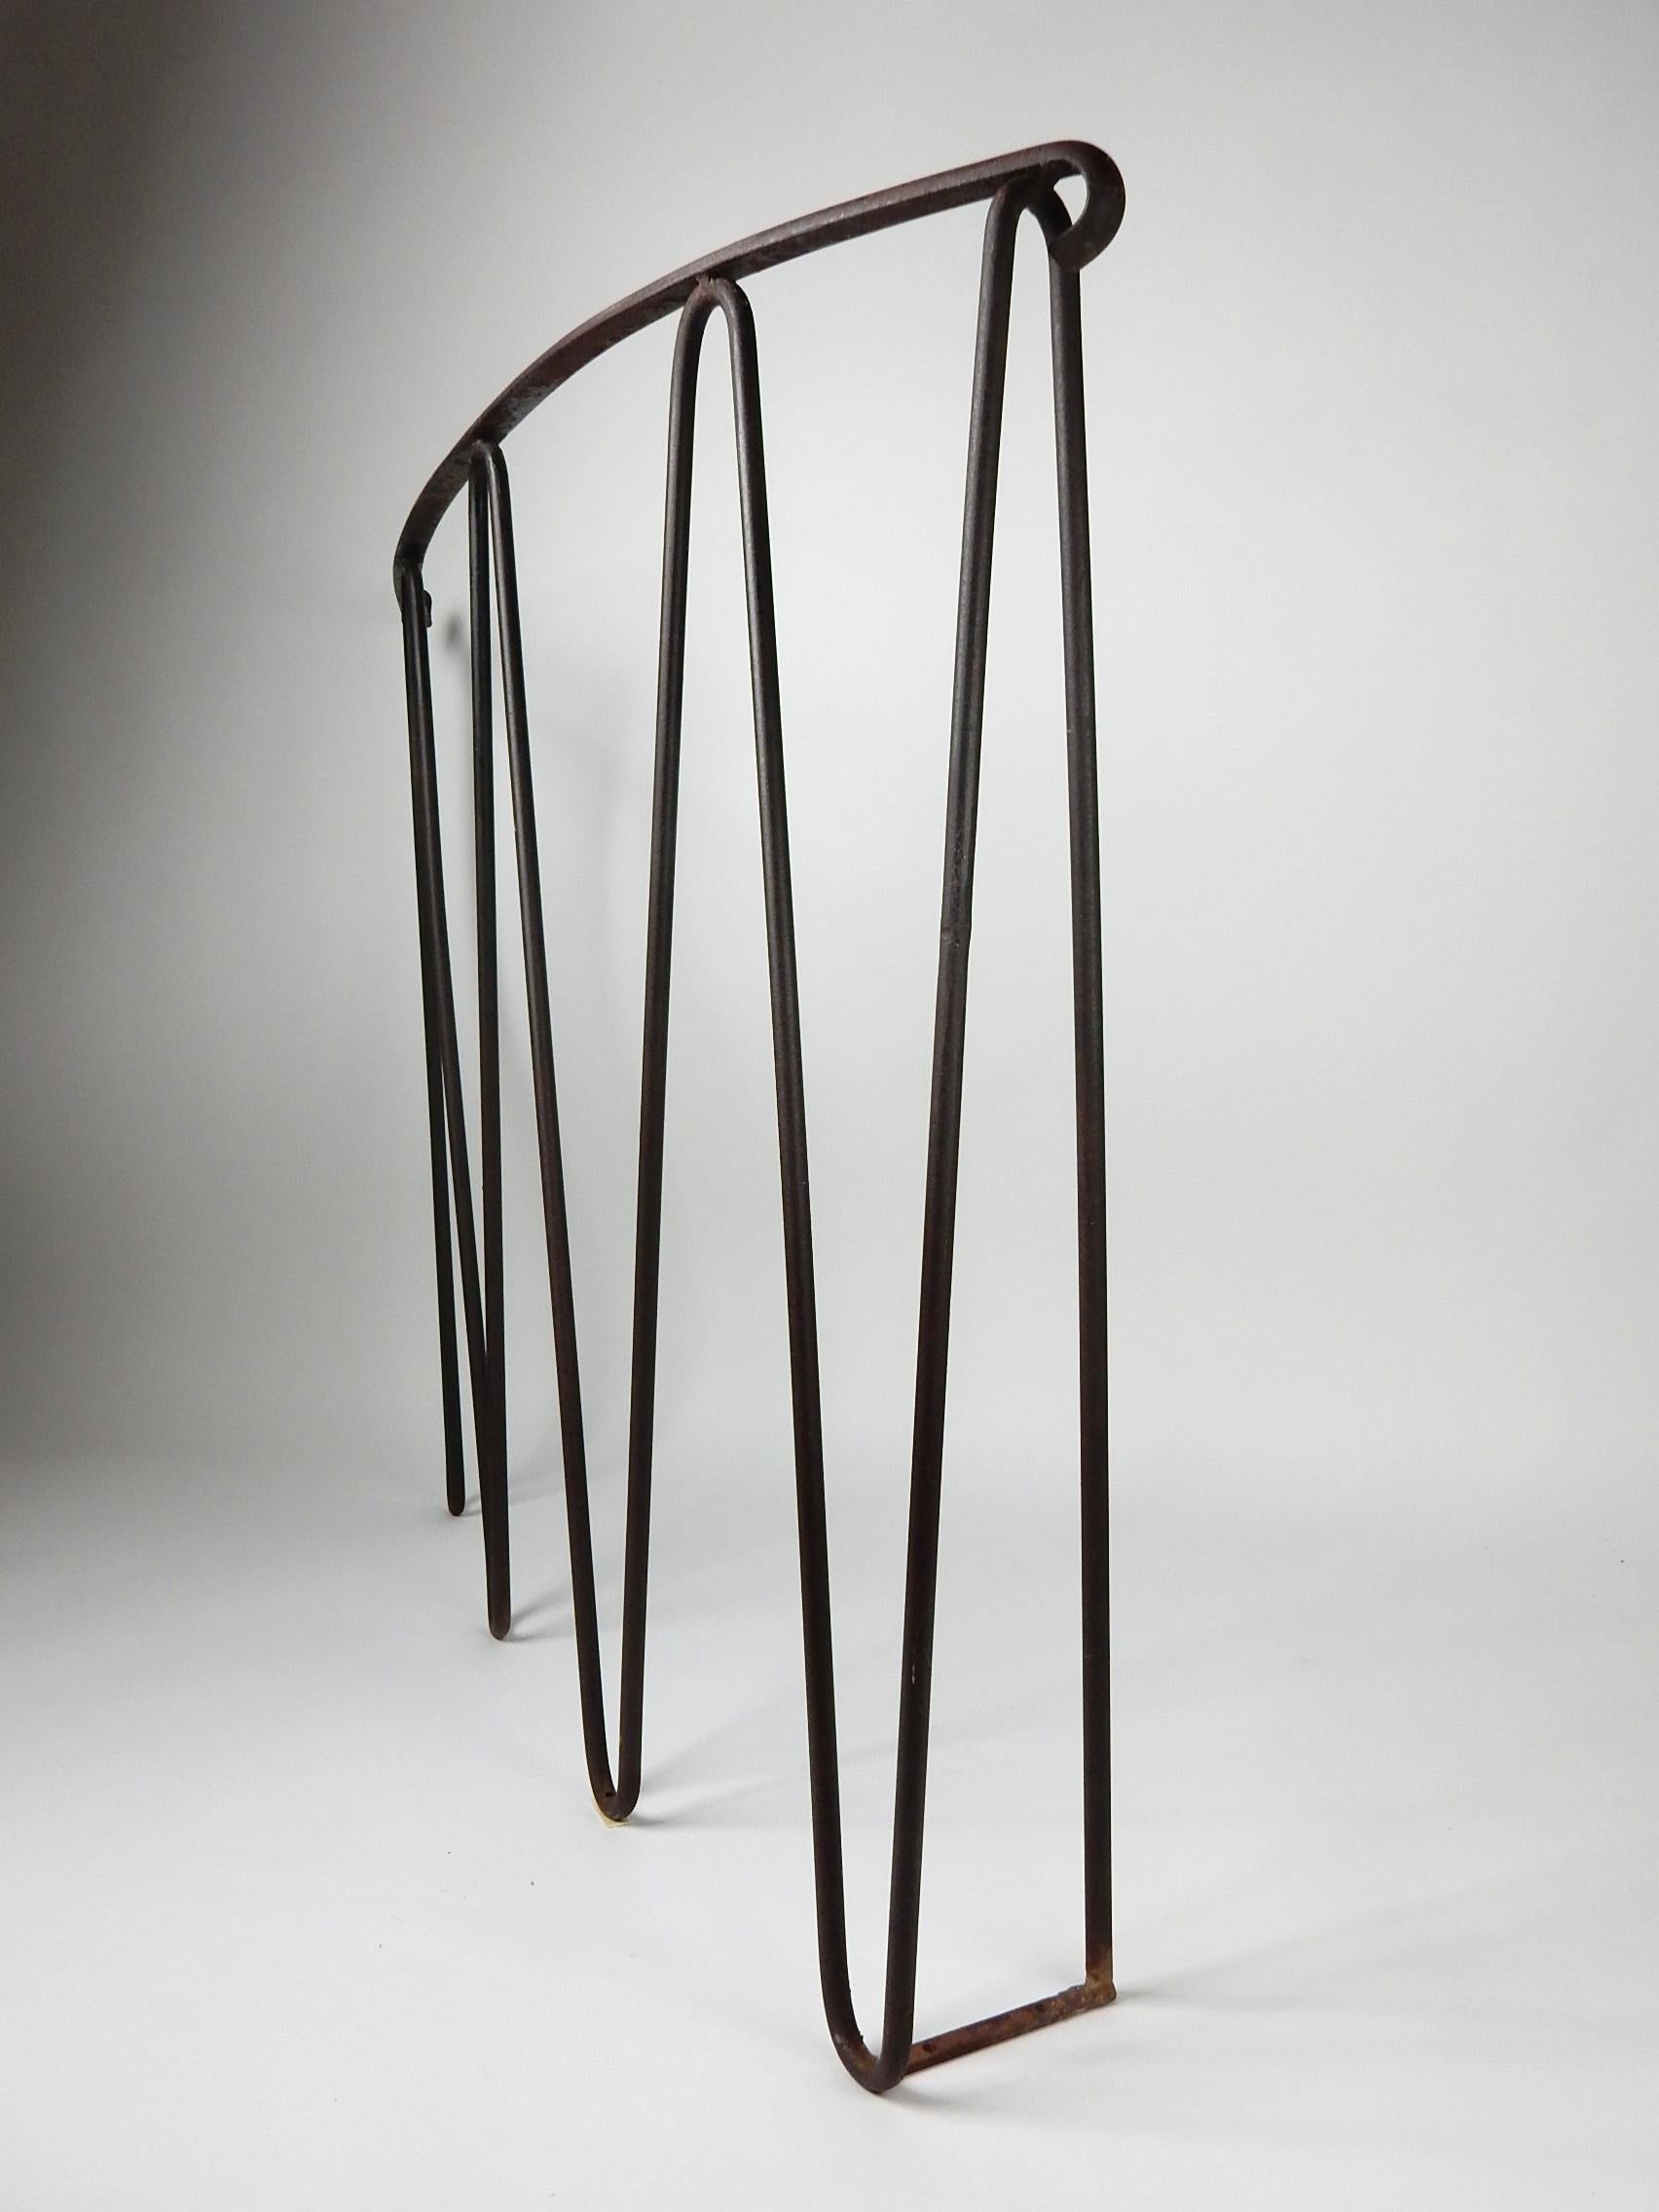 20th Century 1950s Modernist Sculpted Iron Handrail Architectural Element